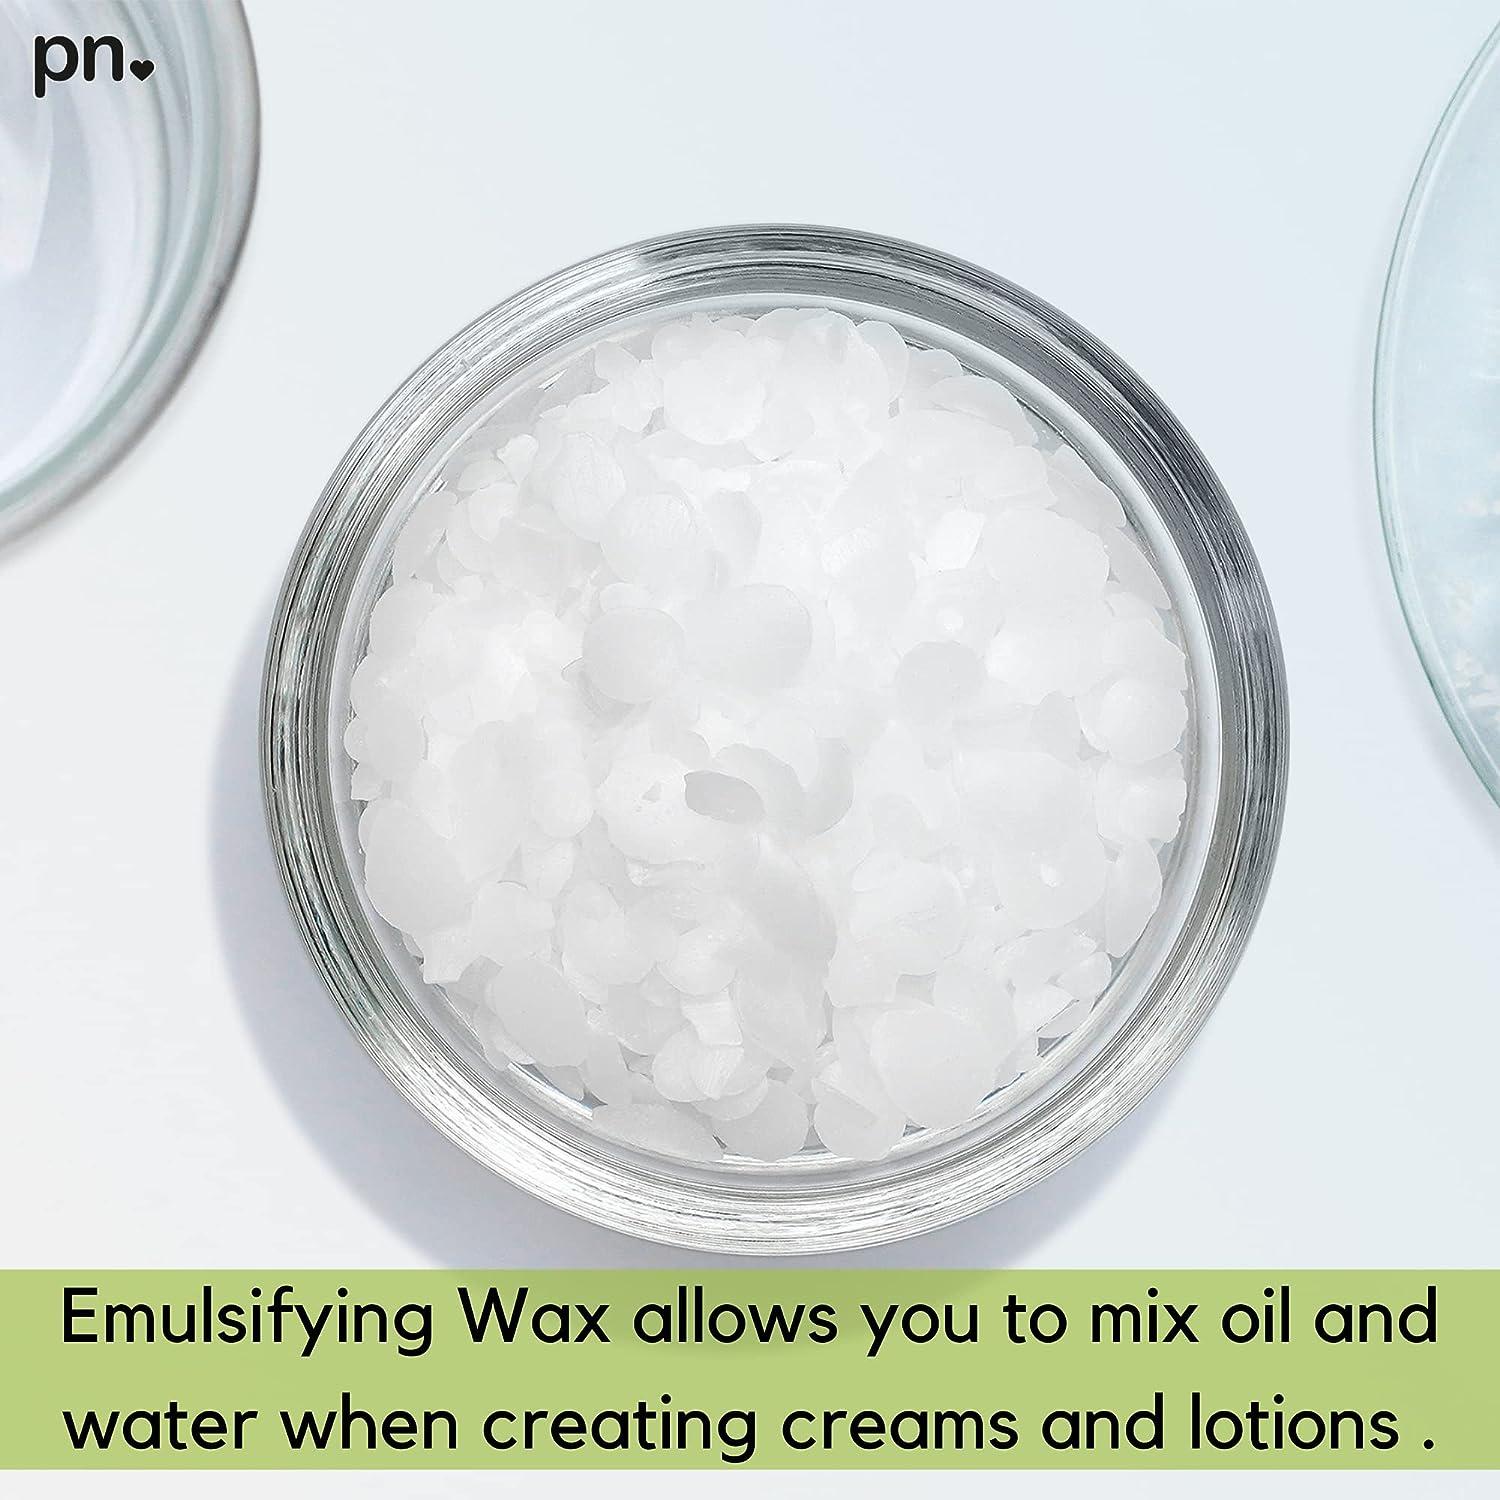 Non-GMO Emulsifying Wax NF Pastilles - 16oz., 100% Natural Plant Derived, Product of USA, For Lotion Cream Making & Cosmetic Formulation